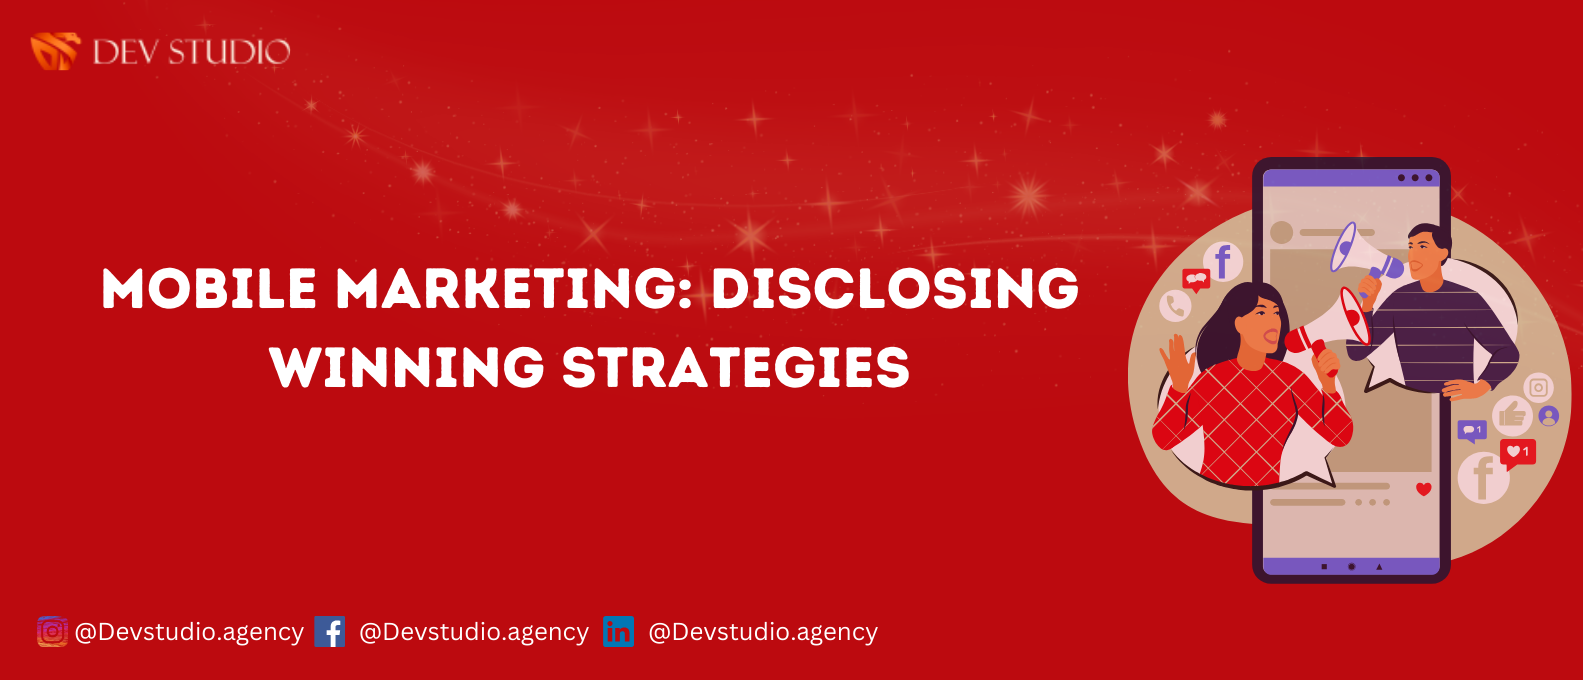 Mobile Marketing: Disclosing the Advantages, Disadvantages, and Winning Strategies